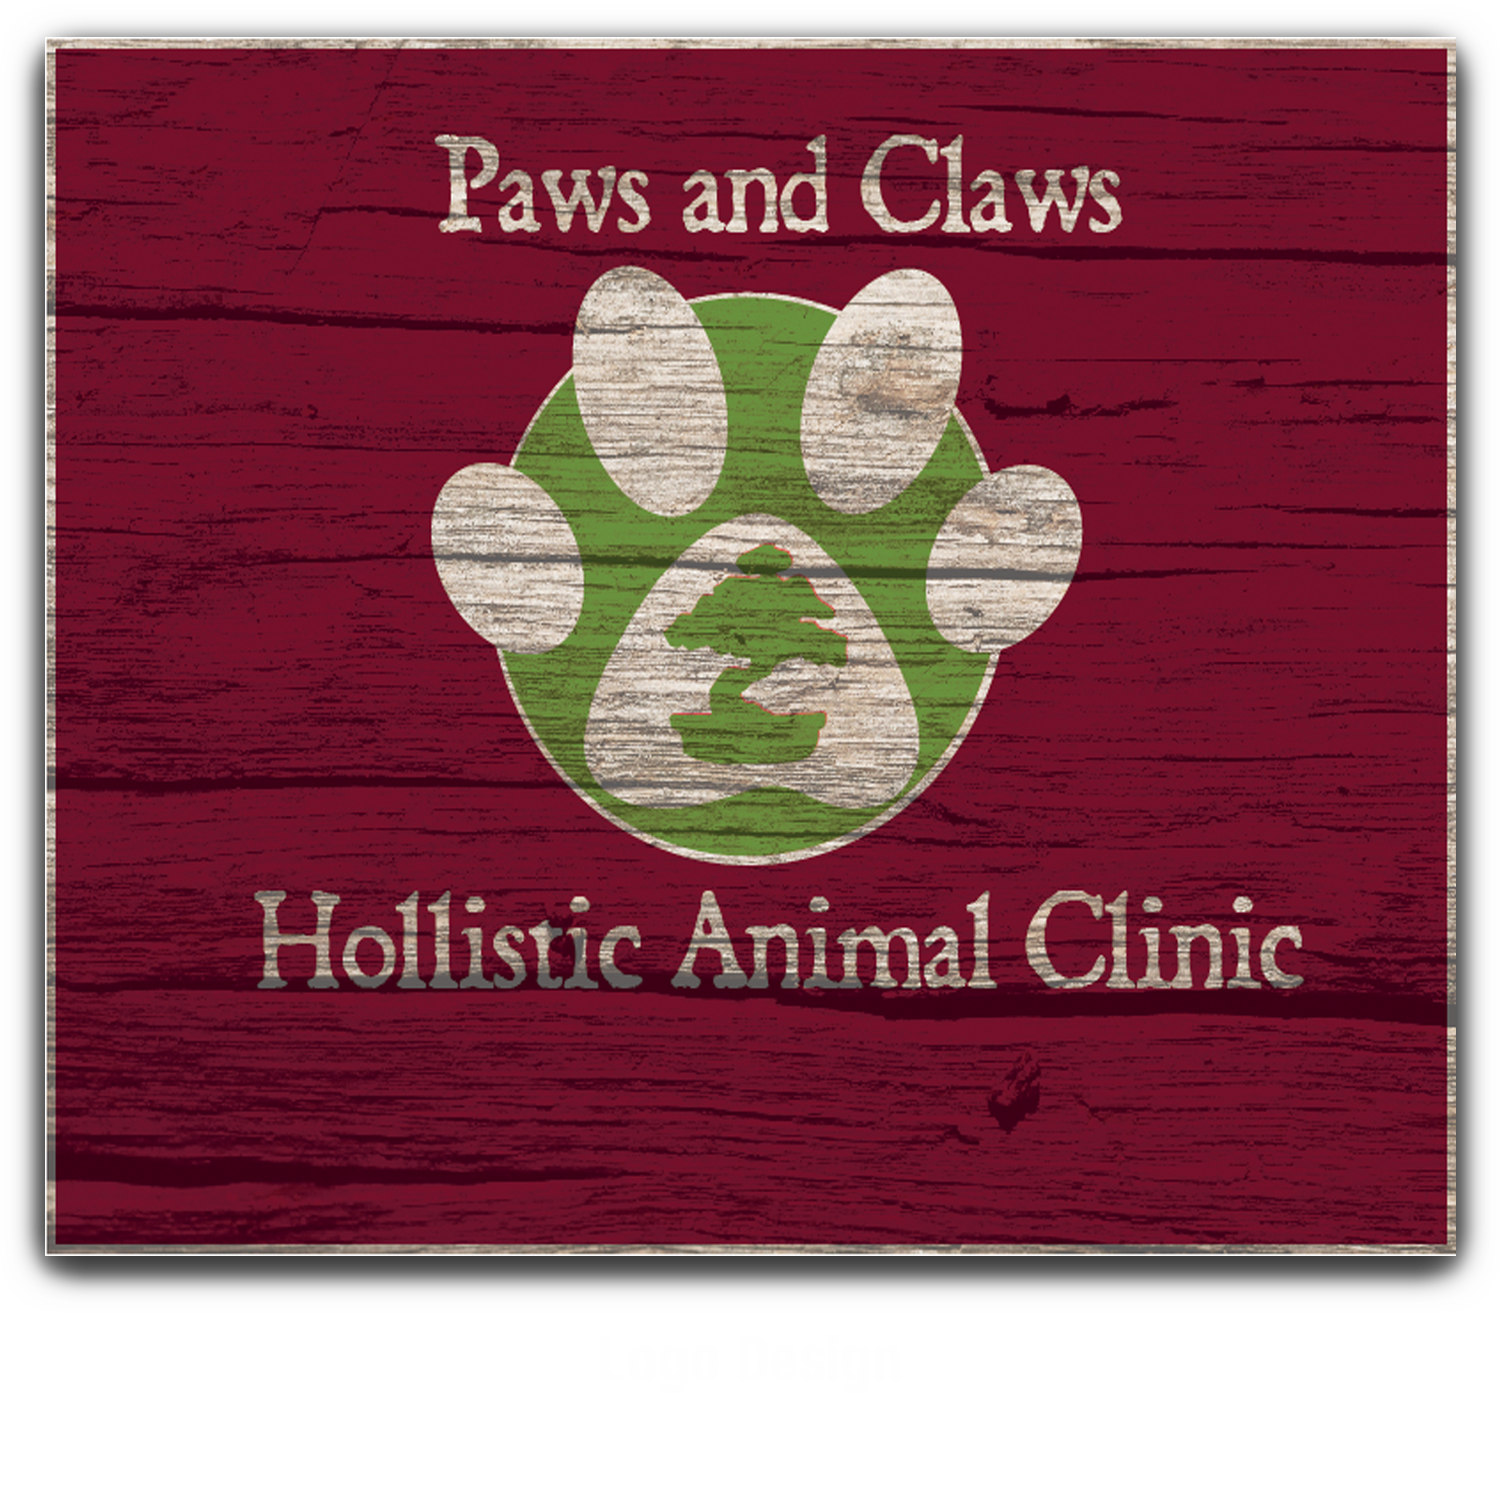 Paws and Claws logo